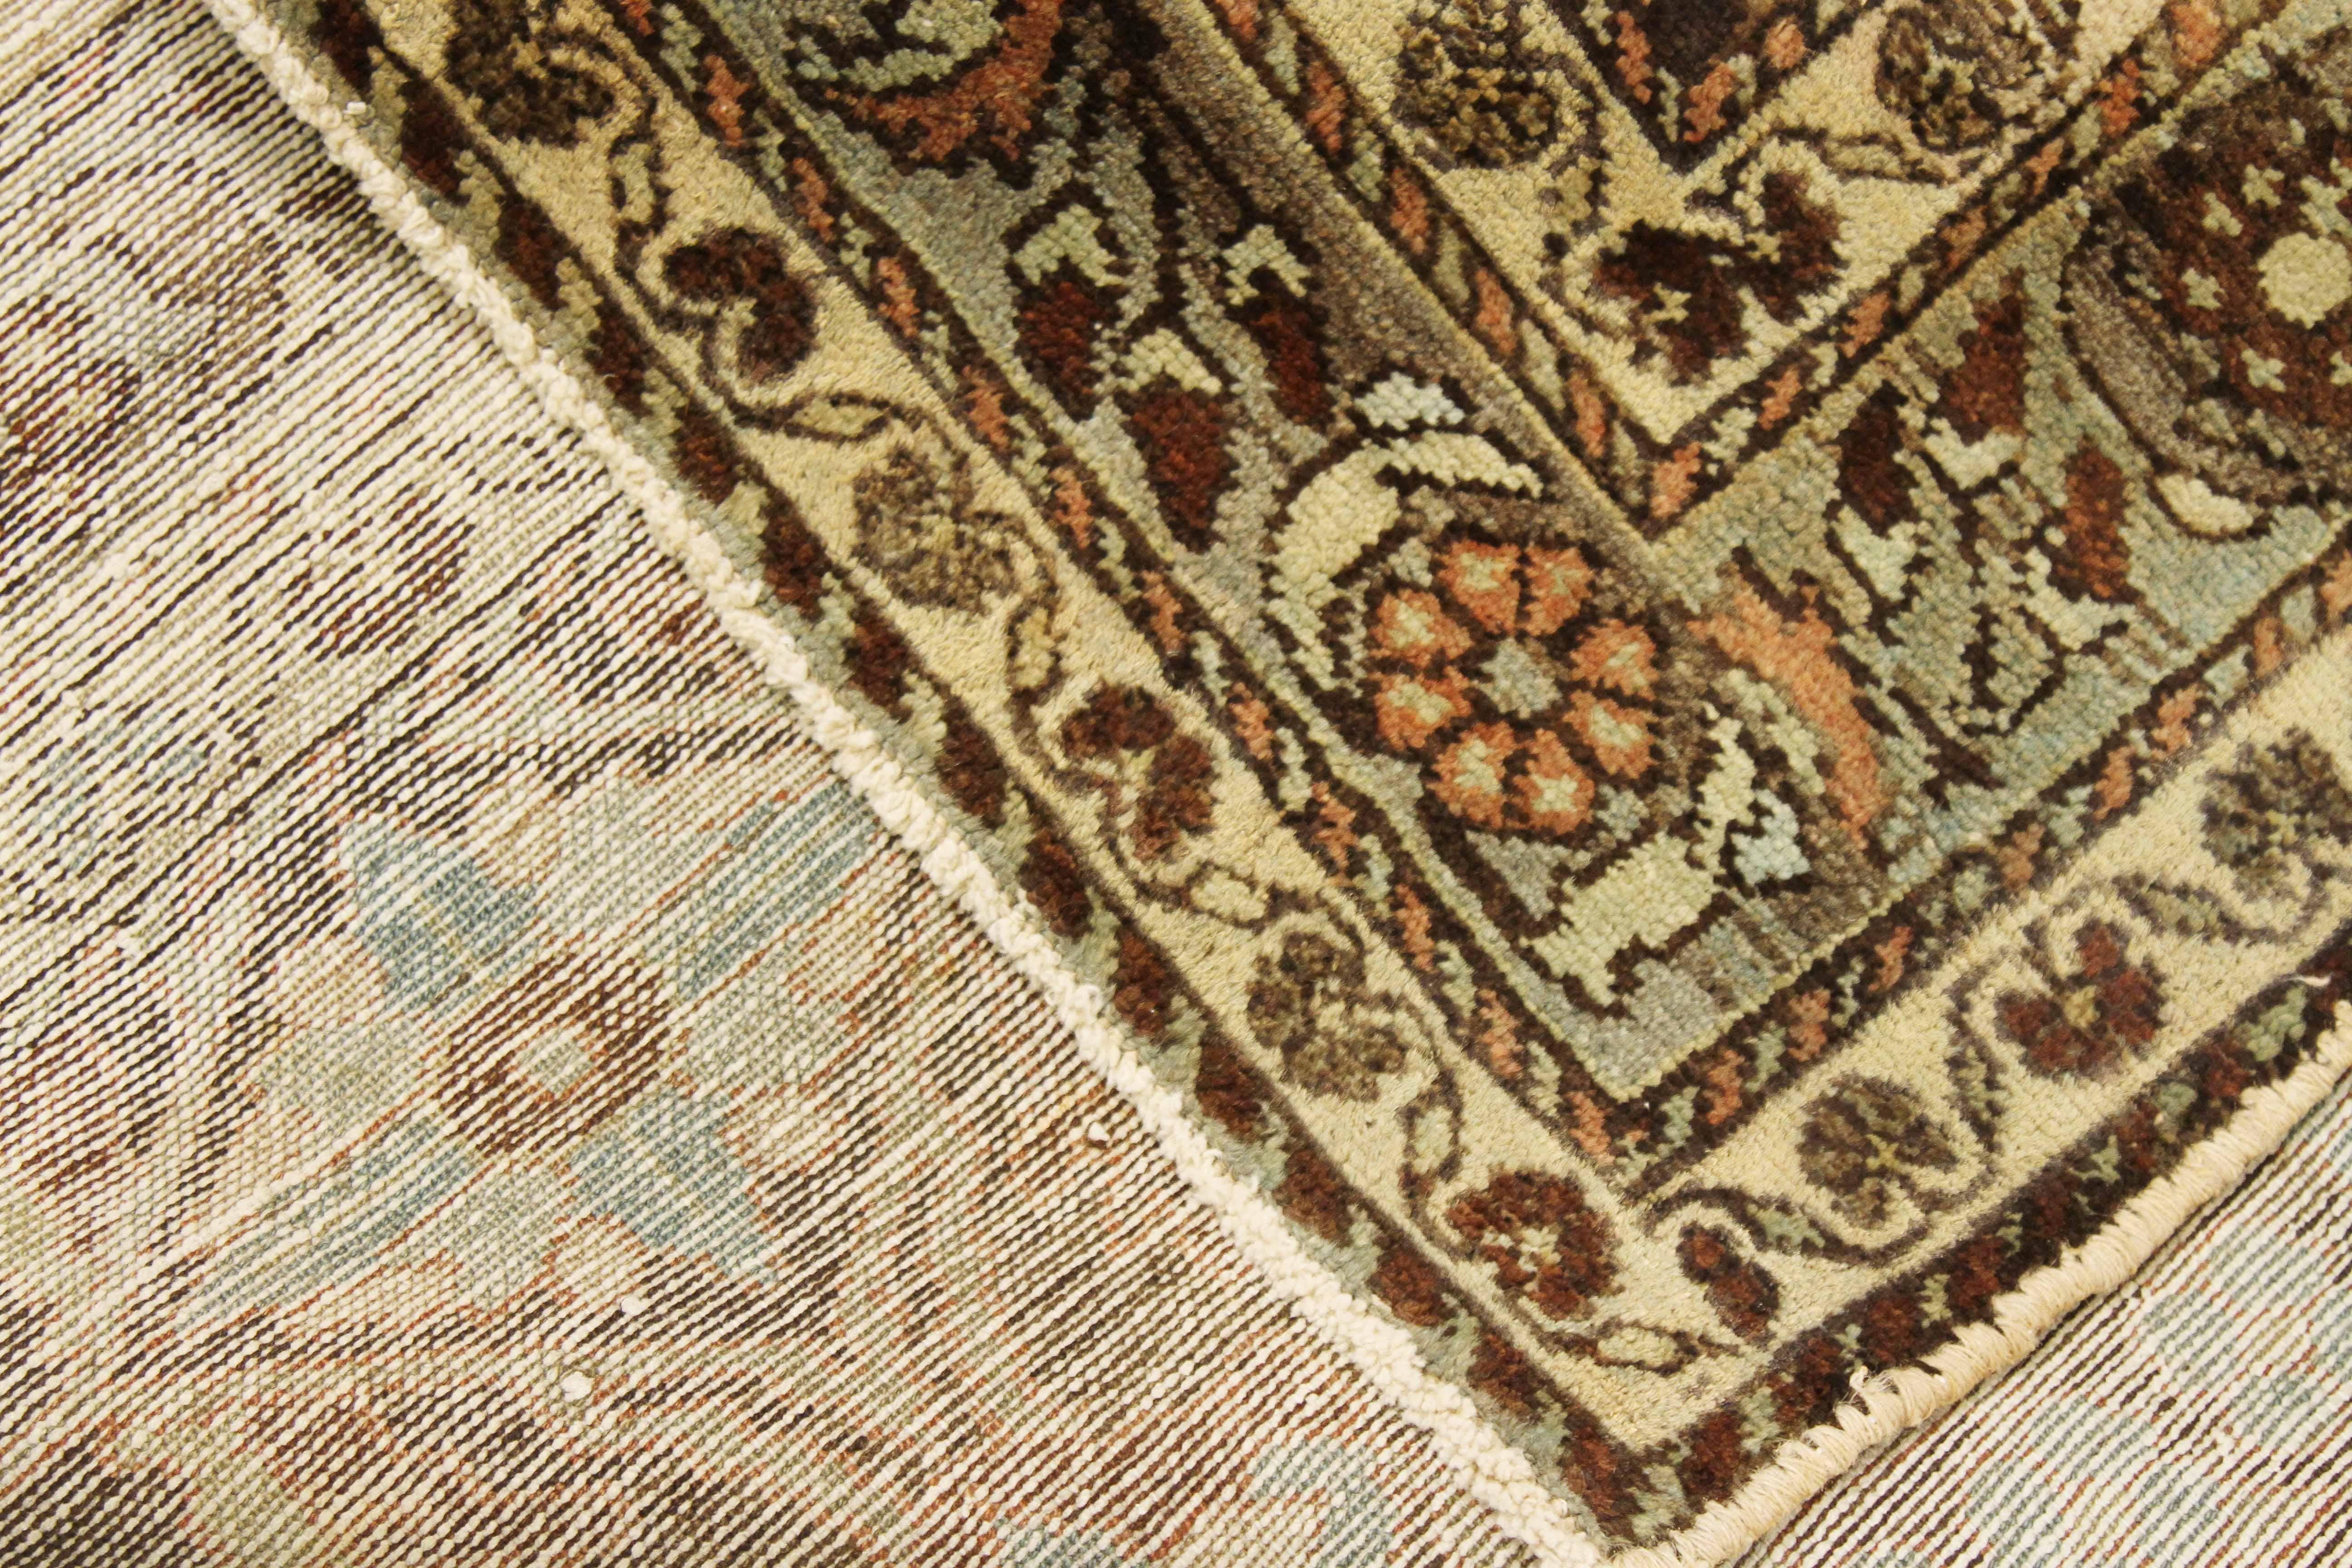 Other Antique Persian Hamadan Rug with Green and Blue Floral Details on Brown Field For Sale